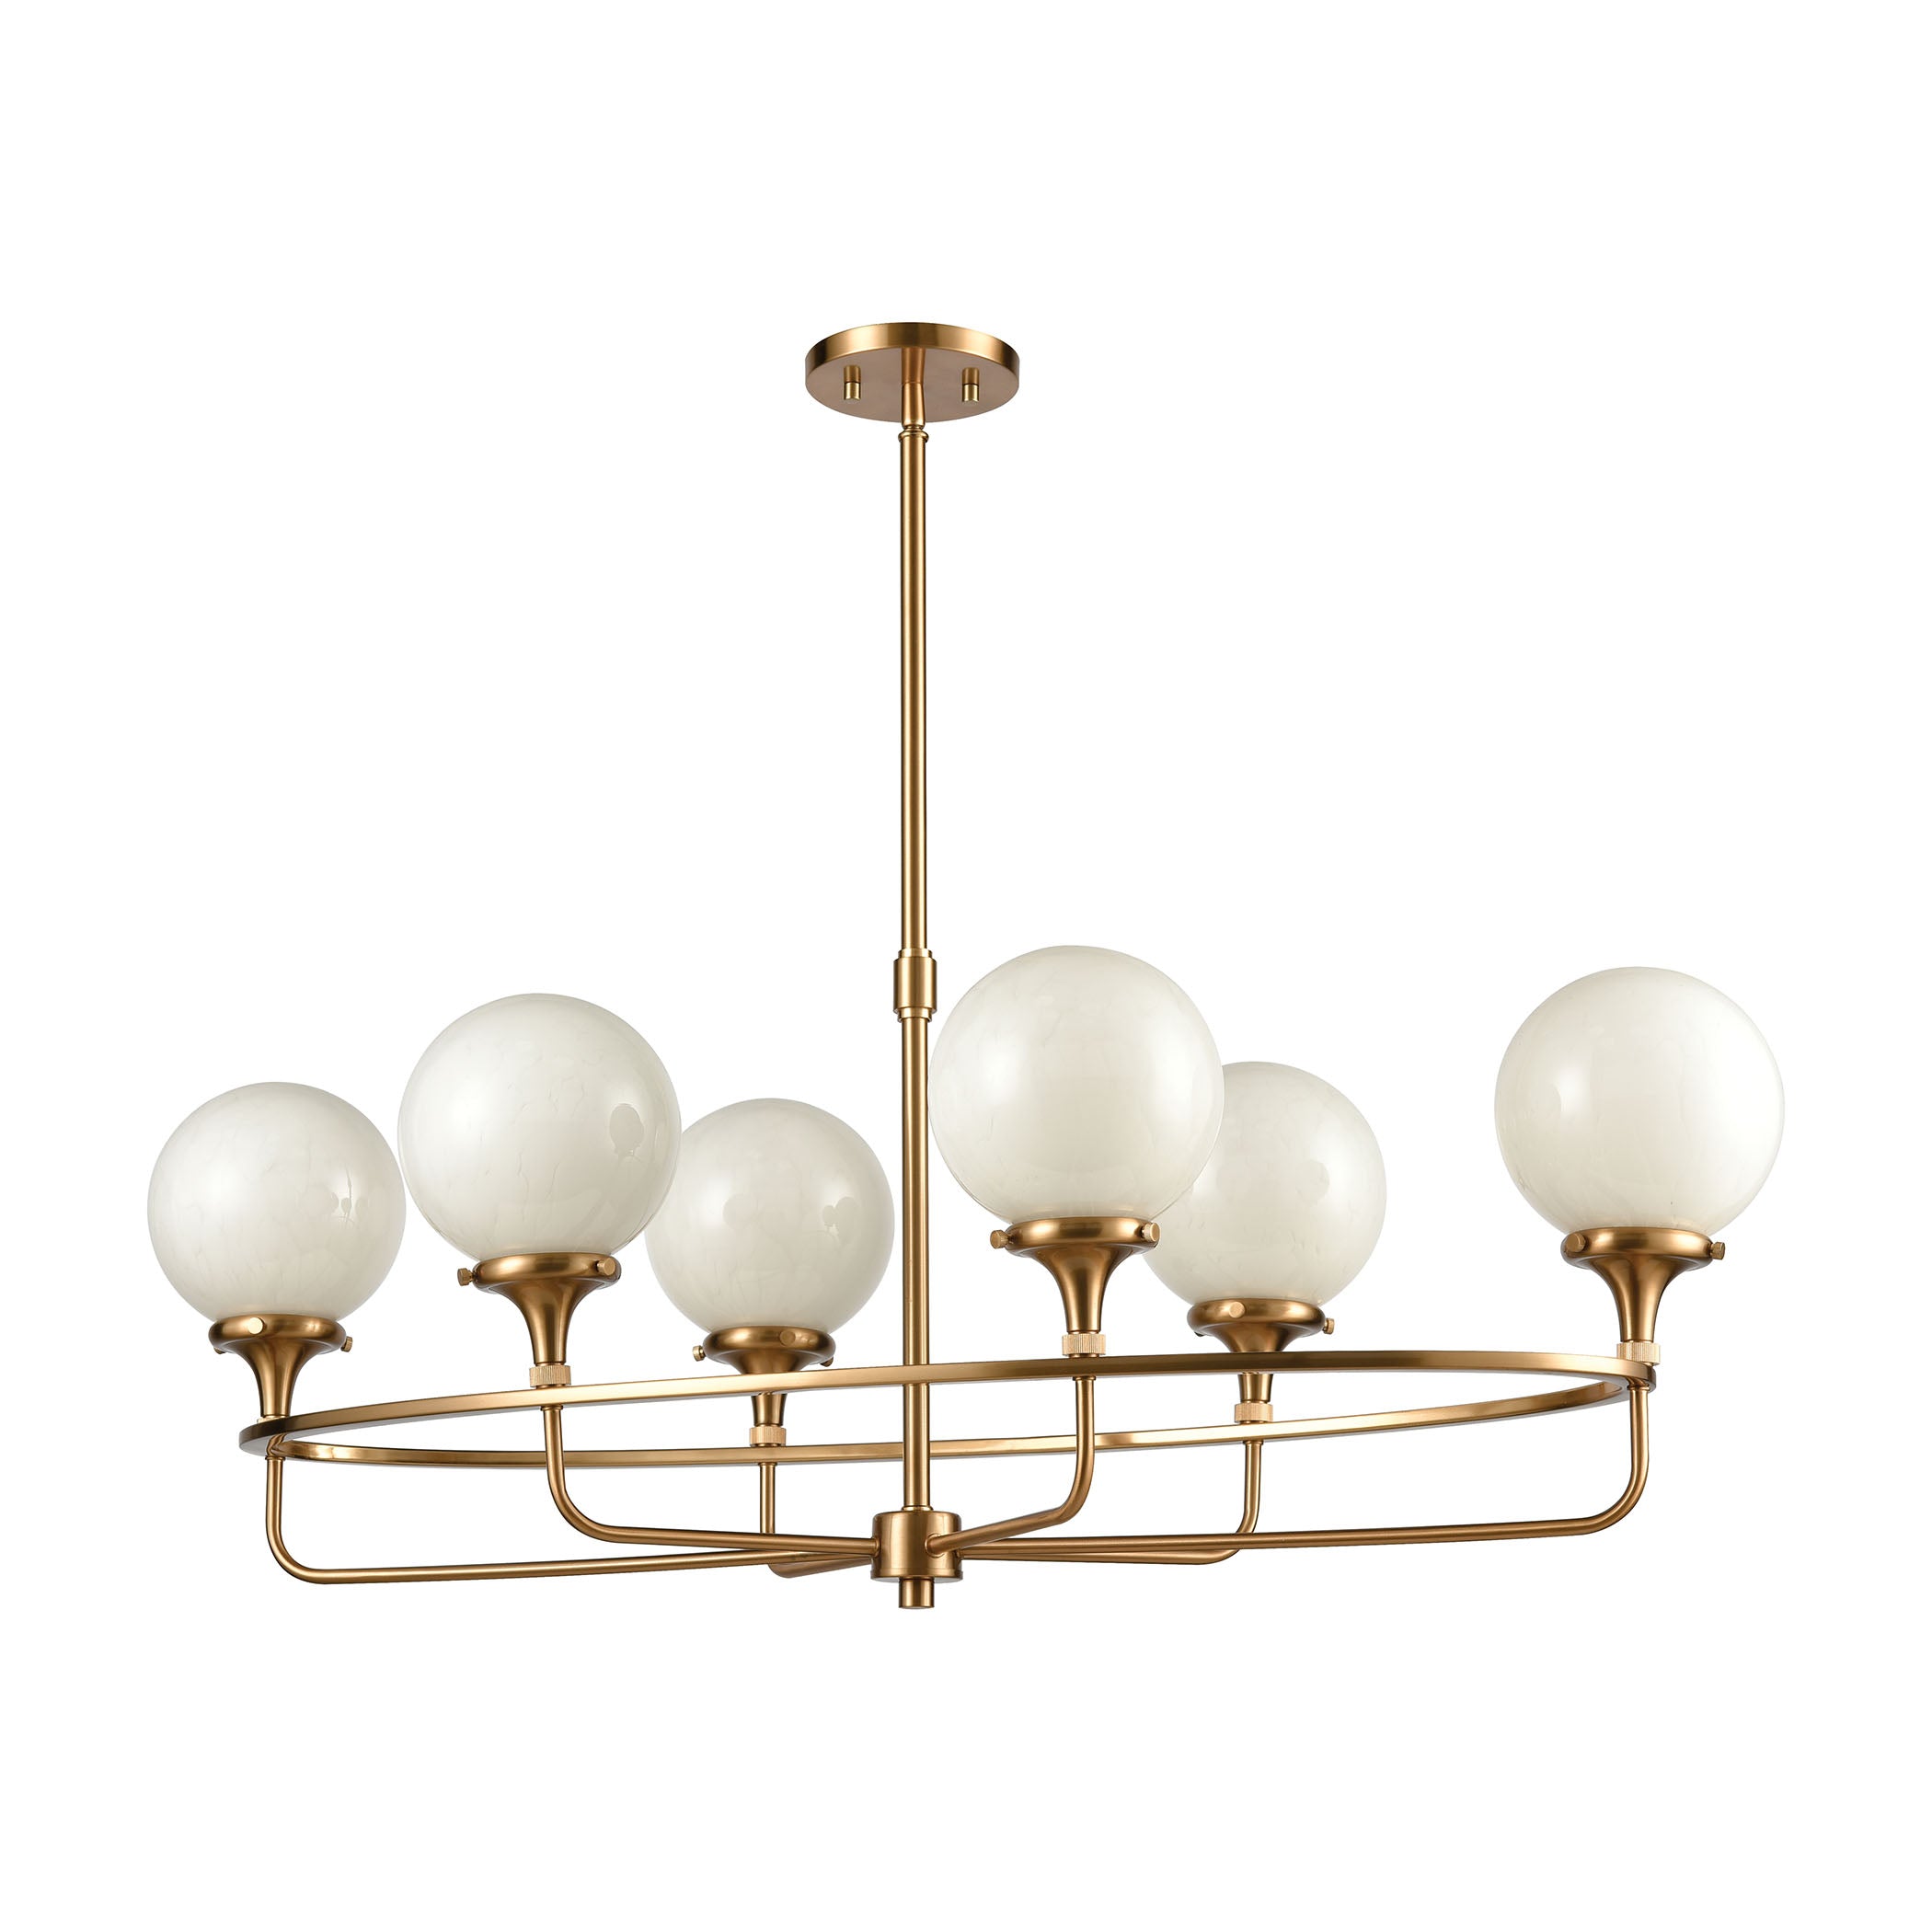 ELK Lighting 30147/6 Beverly Hills 6-Light Island Light in Satin Brass with White Feathered Glass